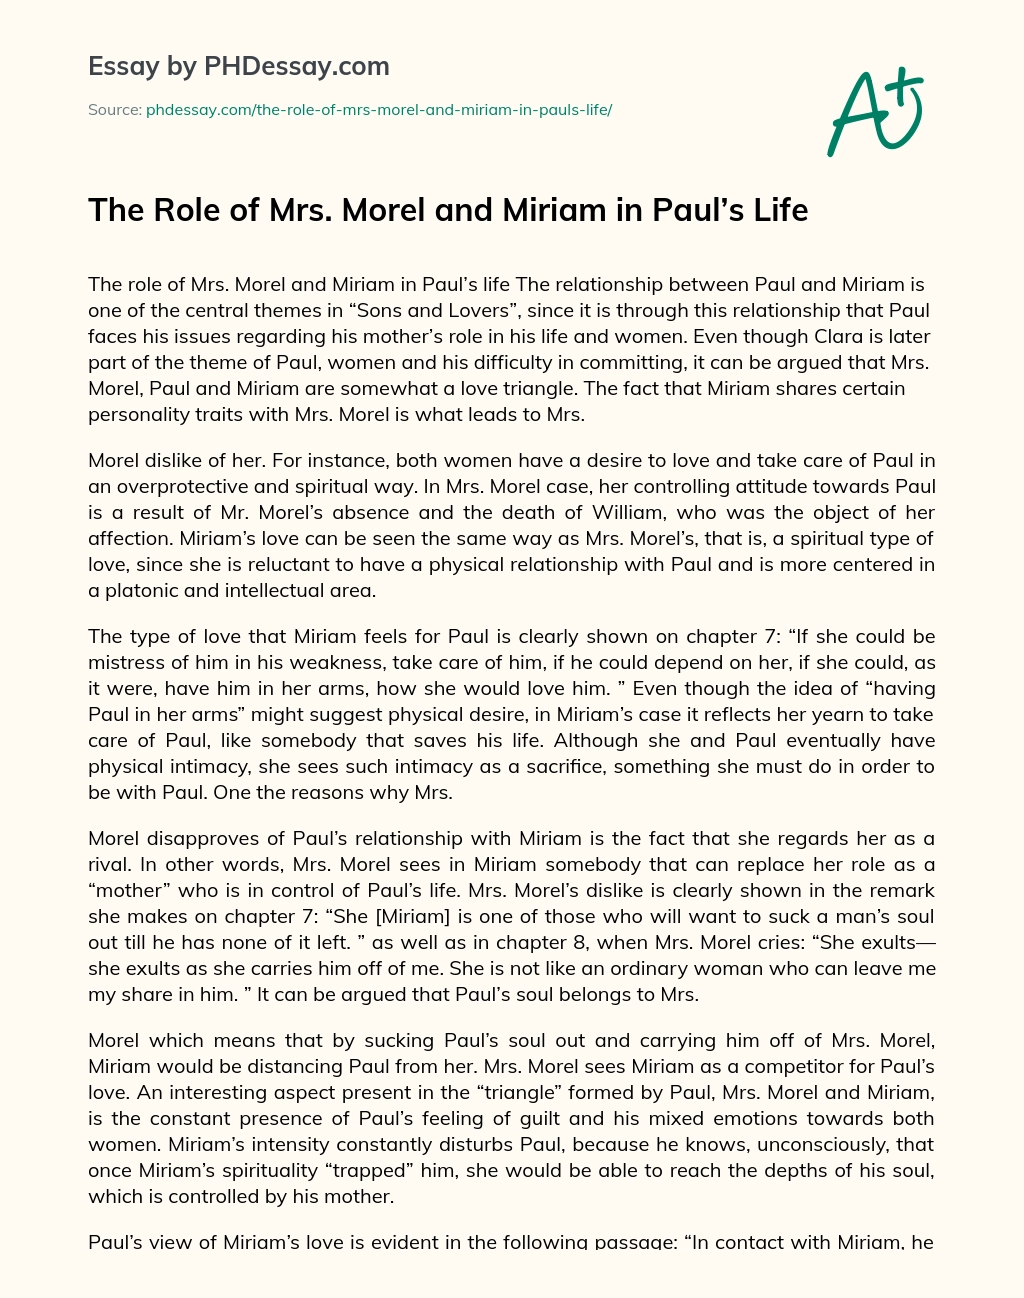 The Role of Mrs. Morel and Miriam in Paul’s Life essay